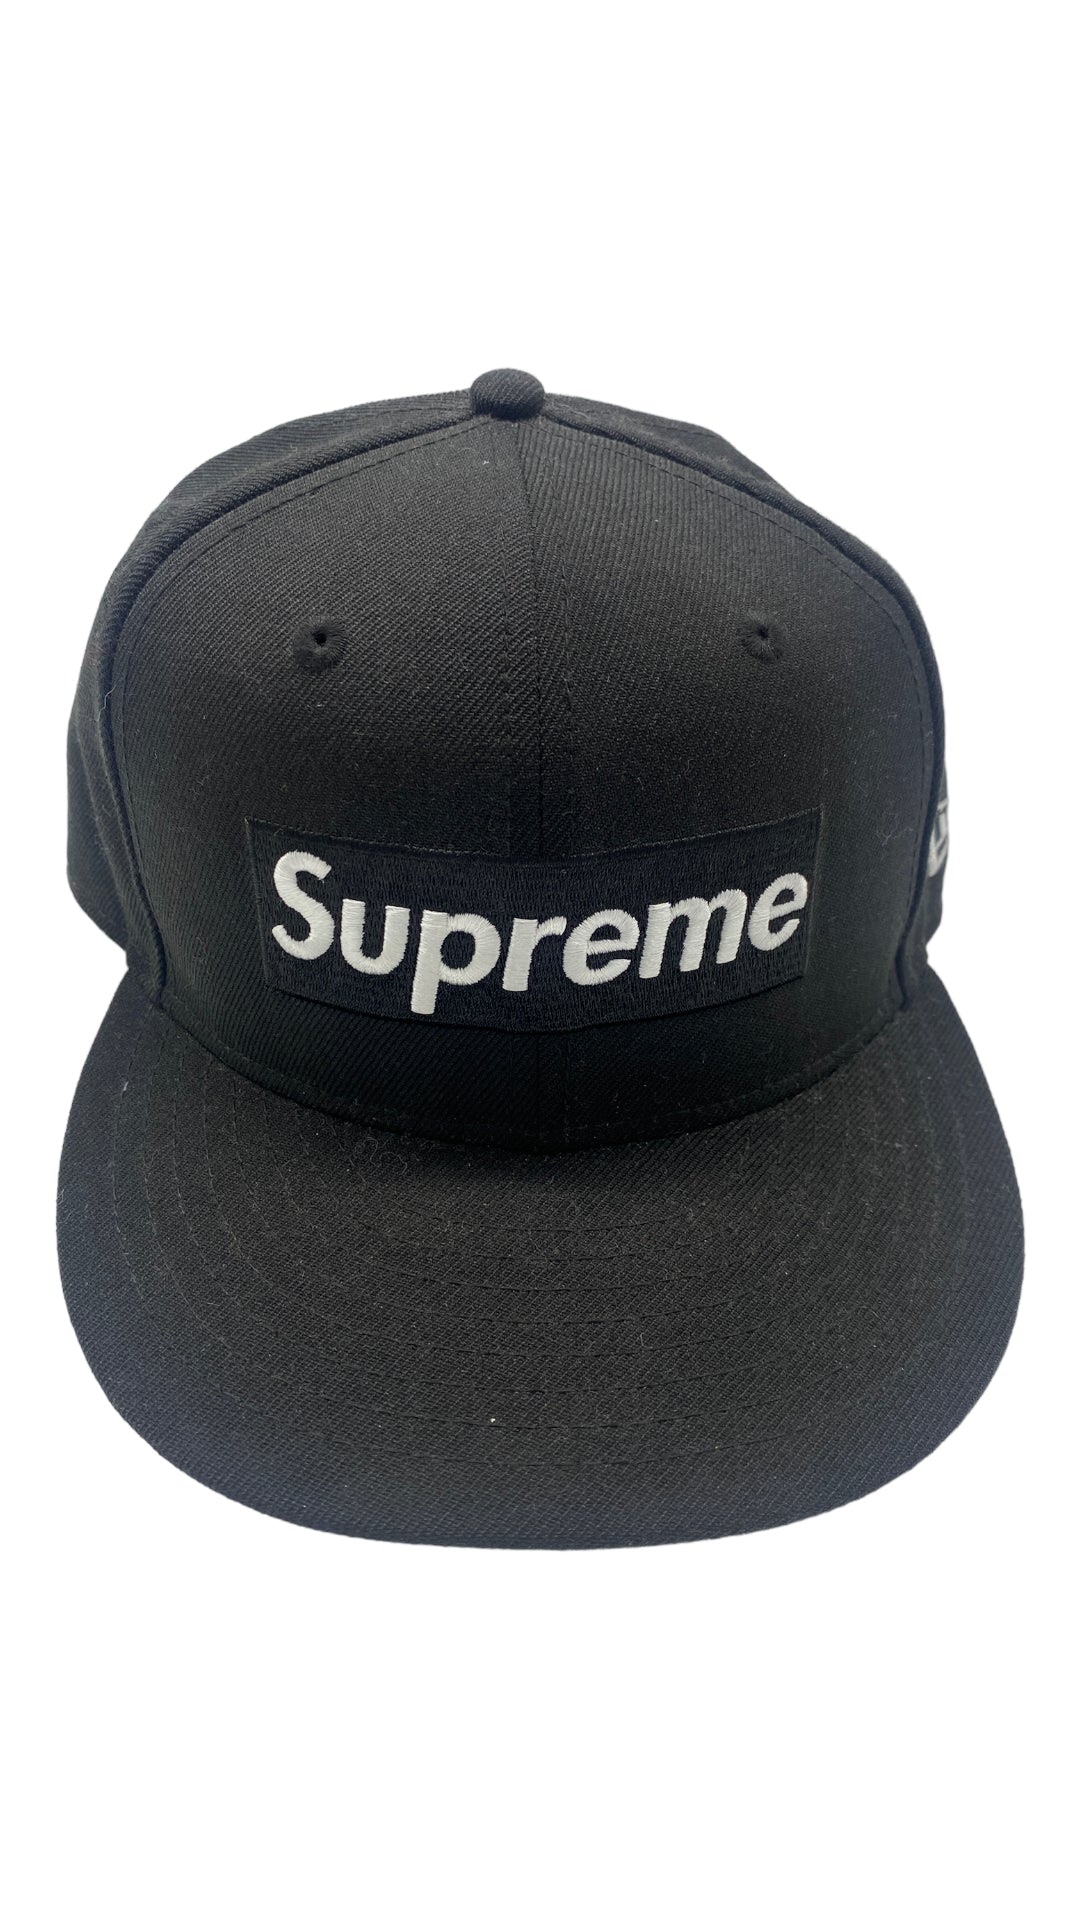 Preowned Supreme x Playboy Fitted Hat Sz 7 3/8